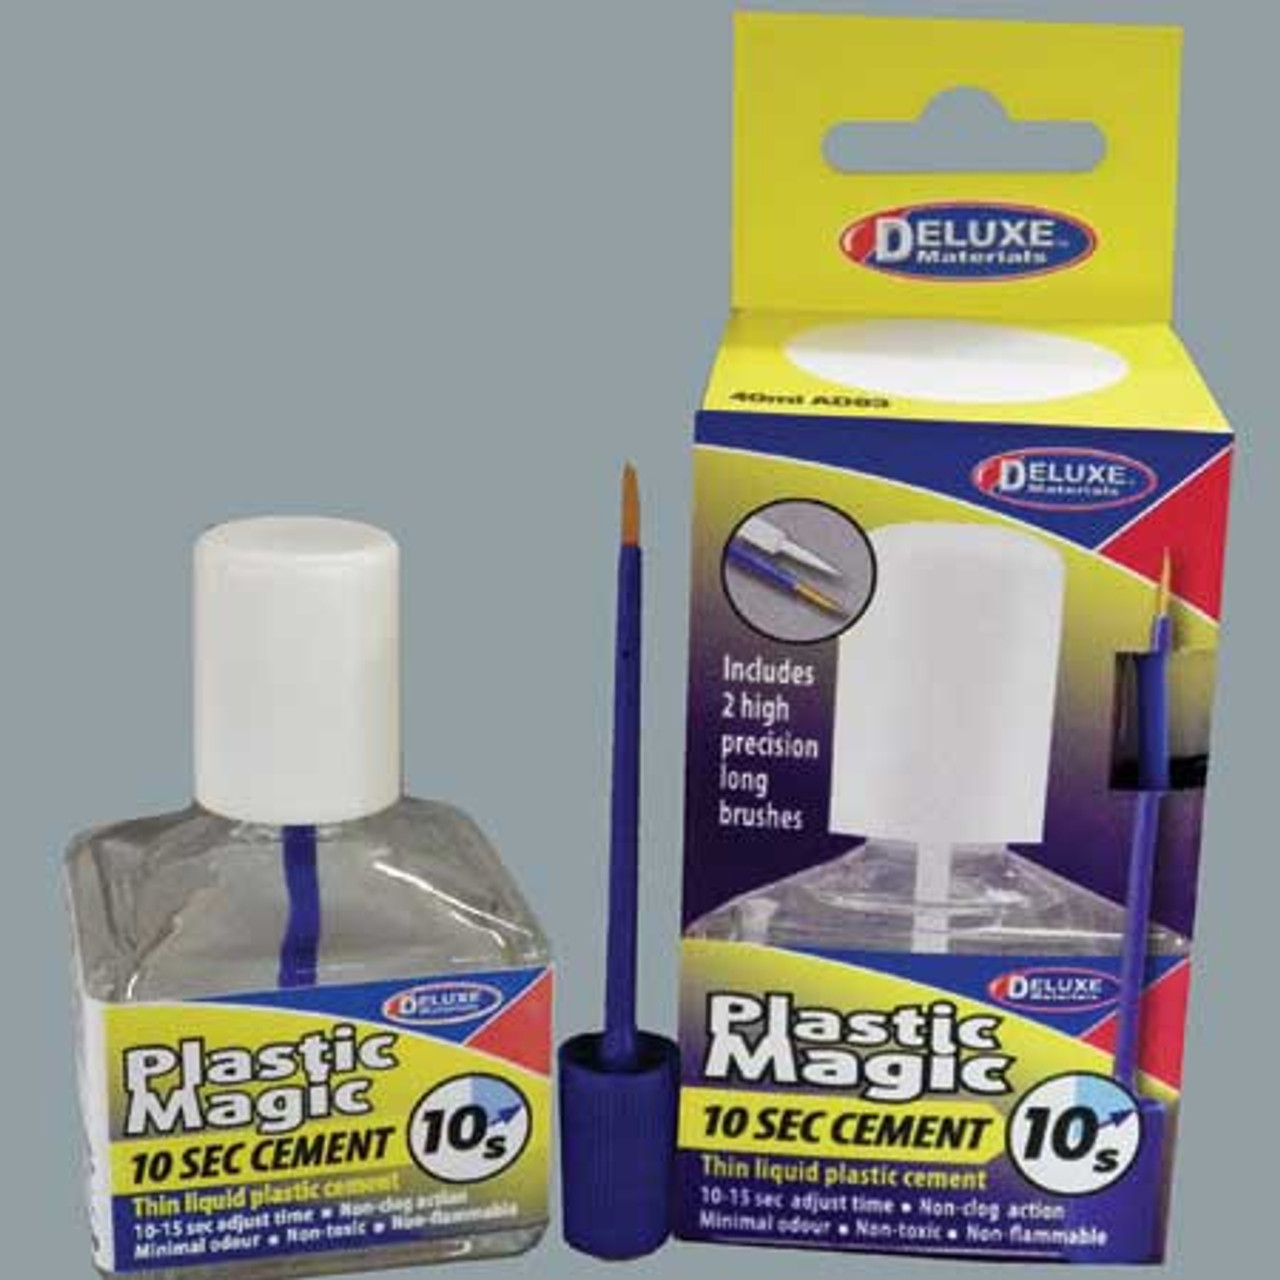 Buy the Deluxe Materials - Plastic Magic 10 Sec Cement Adhesive 40ml (Ad83)  5060243901637 on SALE at www.